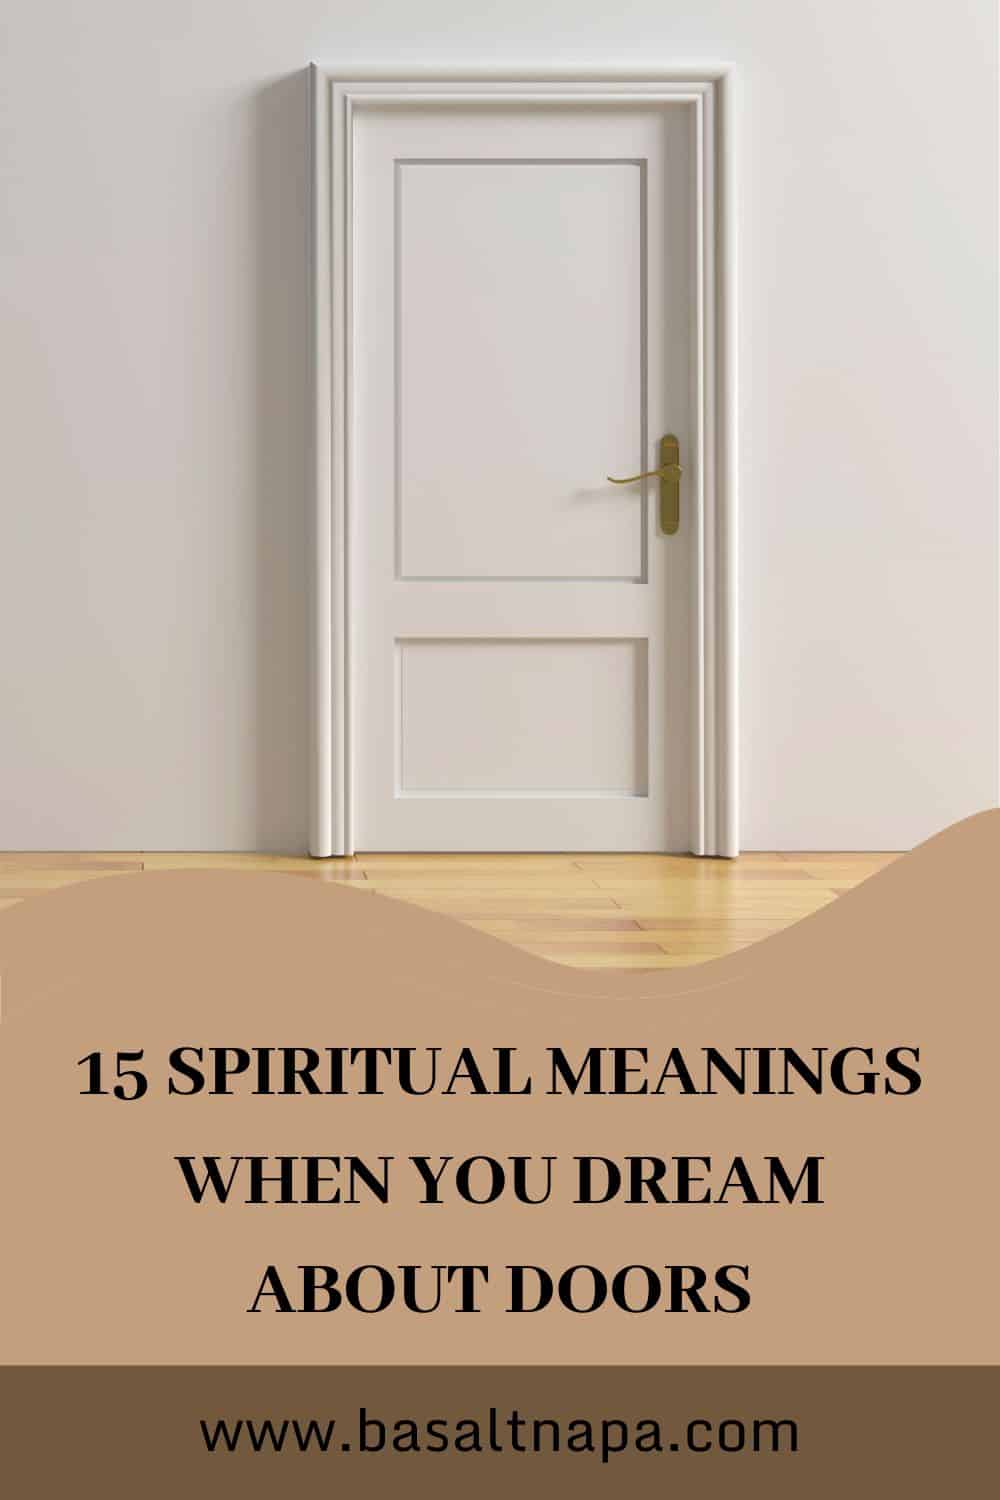 15 Spiritual Meanings When You Dream About Doors